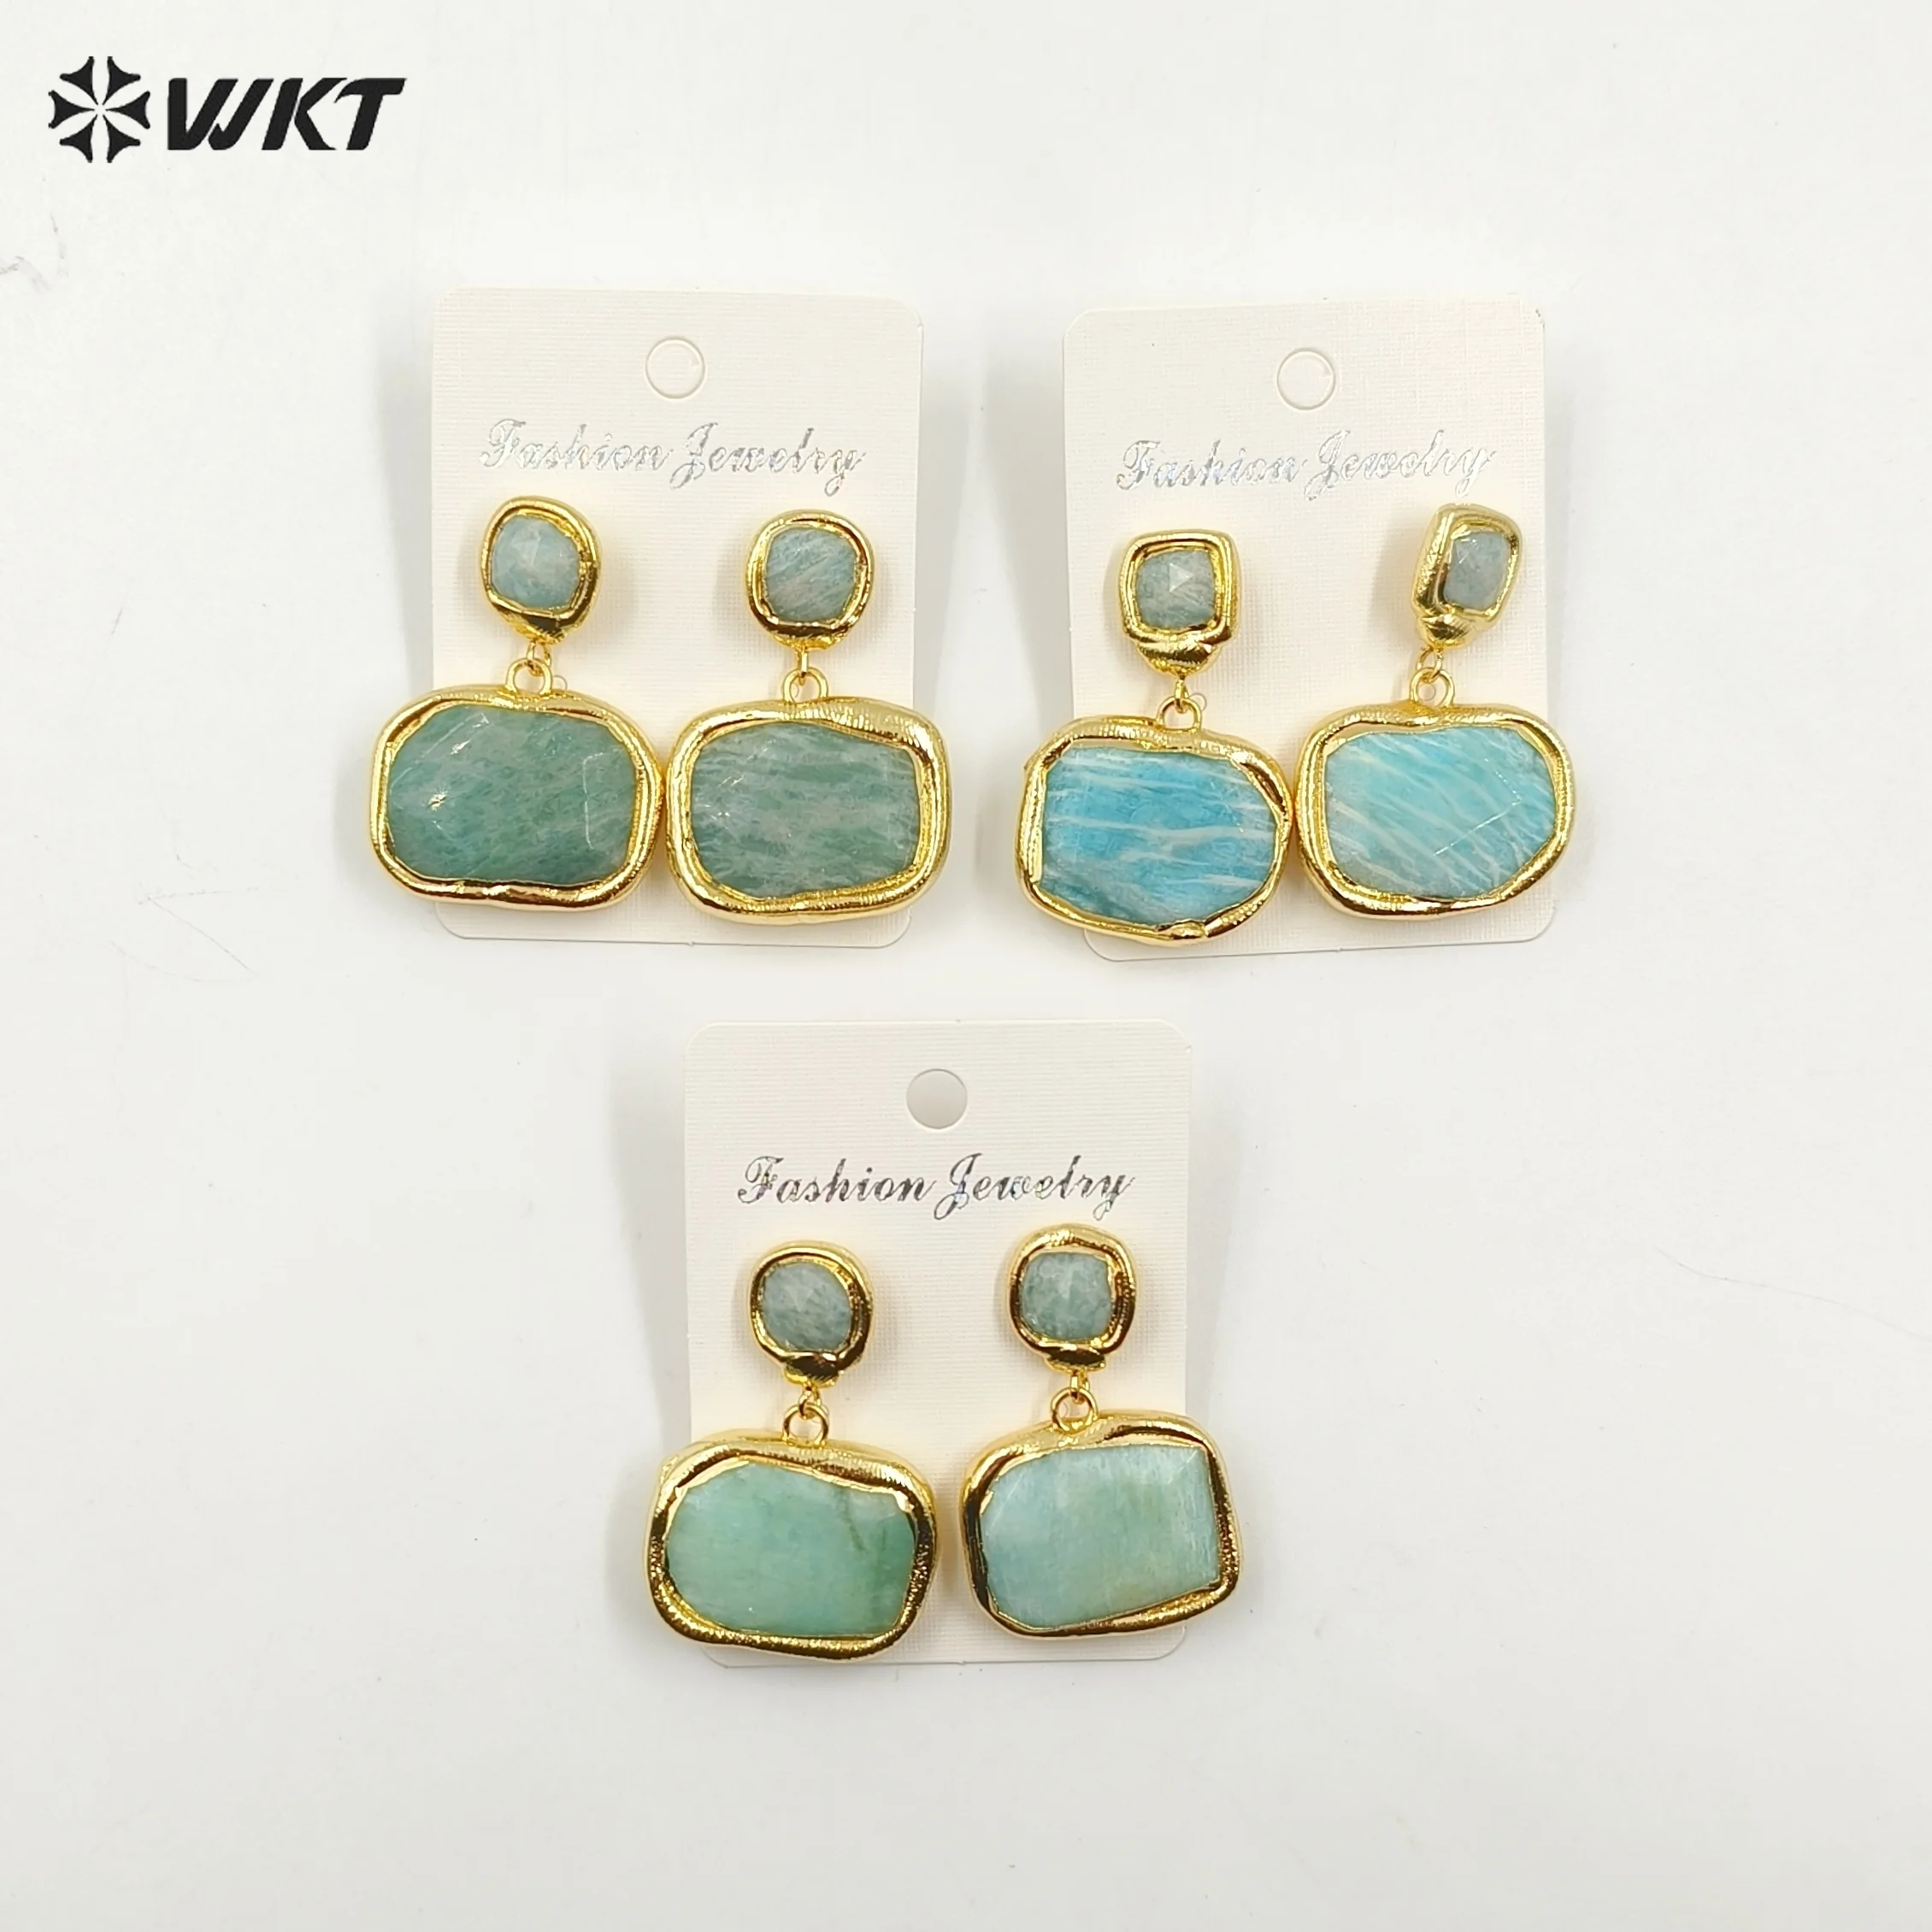 

WT-E753 New Classic Natural Amozonite Stone Randomly Colored With 18k Gold Plating Square Shape Earring For Women Decorated